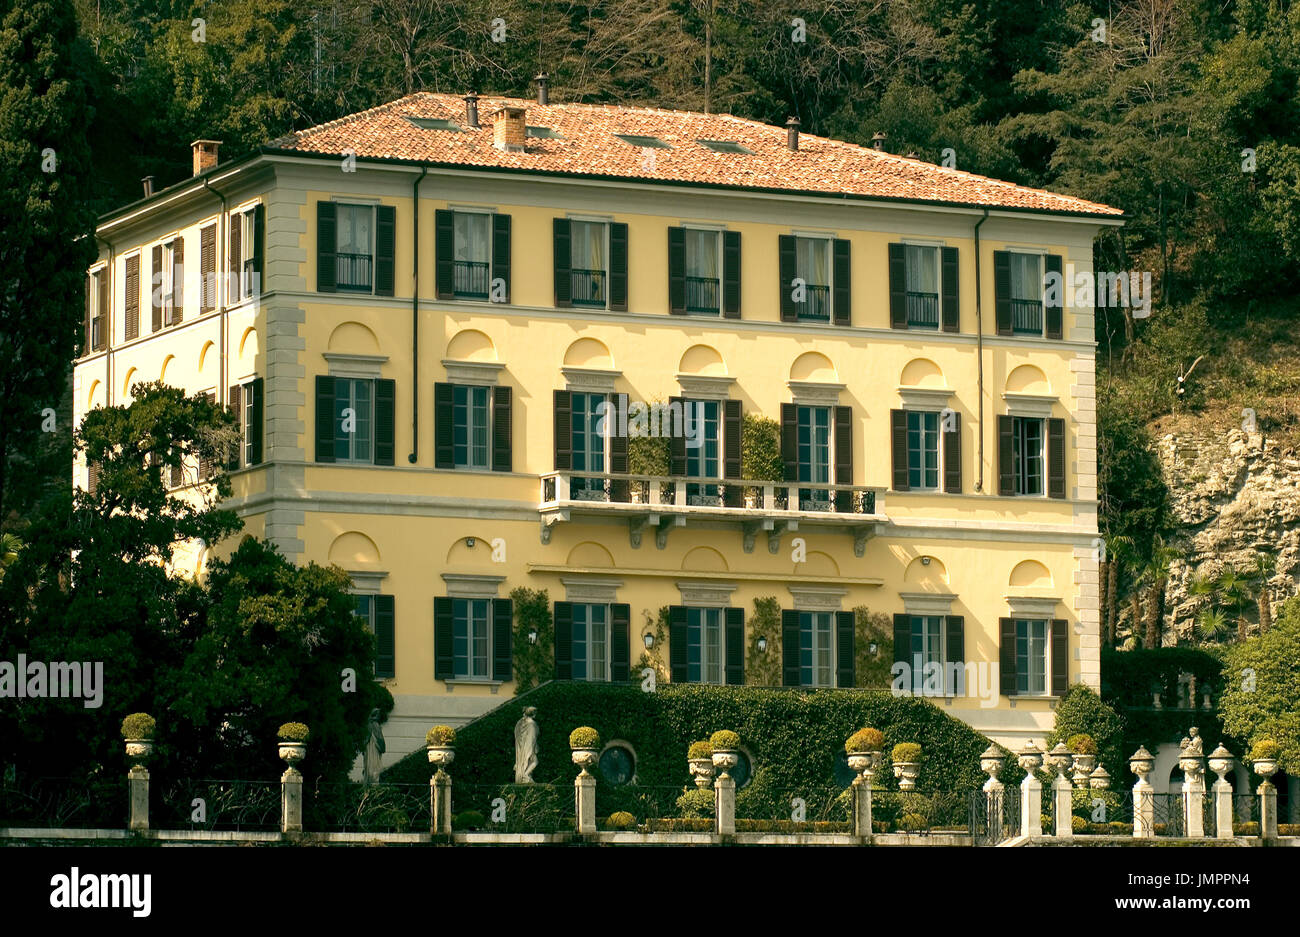 Moltrasio, Italy - March 22, 2006 -- View from Lake Como, Italy of the  Villa Le Fontanelle, home belonging to the late Gianni Versace on the shore  of Lake Como in Moltrasio,